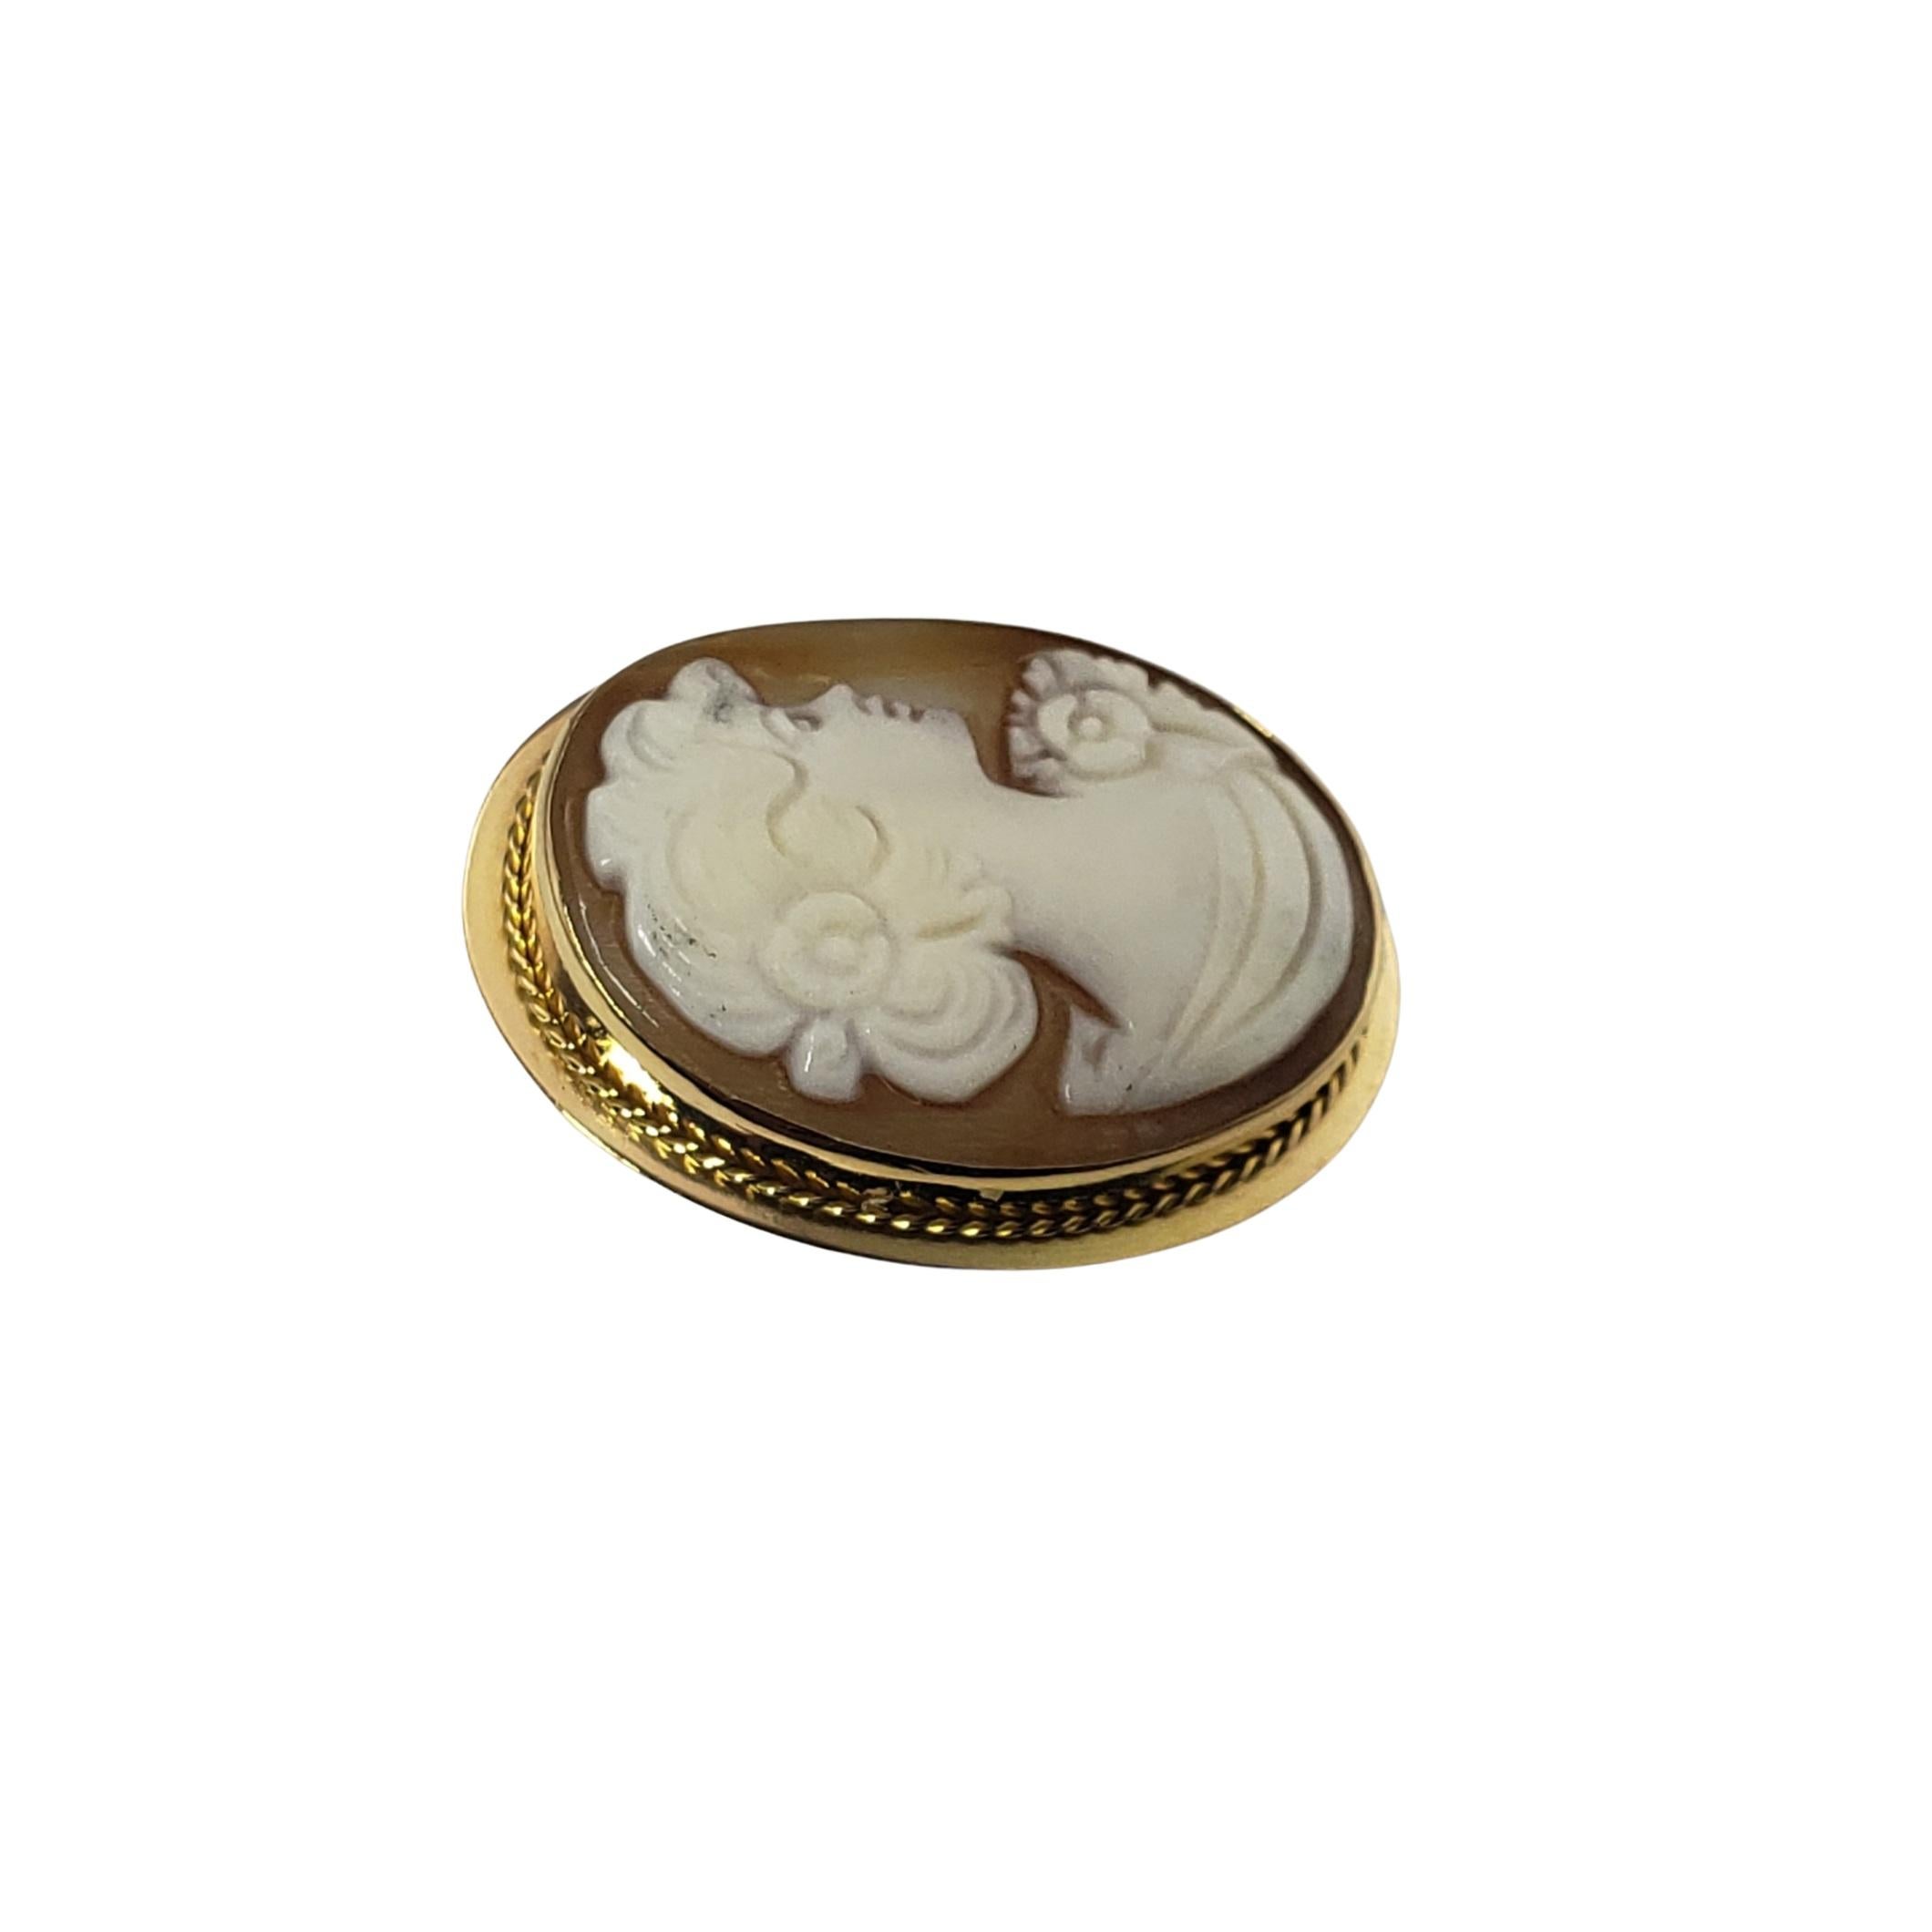 Vintage 18 Karat Yellow Gold Cameo Brooch/Pendant-

This elegant cameo features a lovely lady in profile framed in beautifully detailed 18K yellow gold. Can be worn as a brooch or a pendant.

Size: 23 mm x 18 mm

Weight: 1.7 dwt. / 2.7 gr.

Stamped: